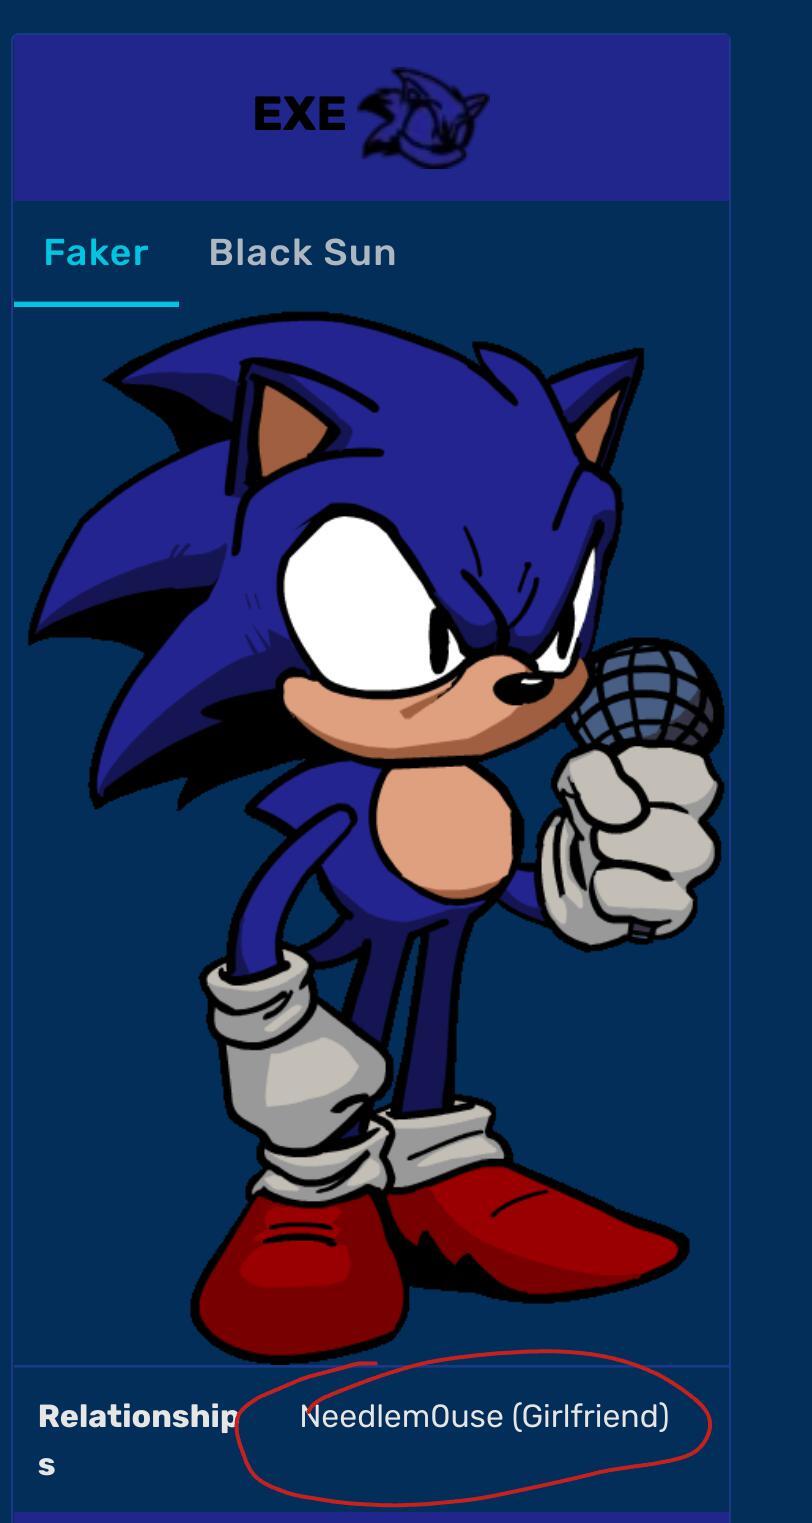 FNF Sonic.exe Test - release date, videos, screenshots, reviews on RAWG